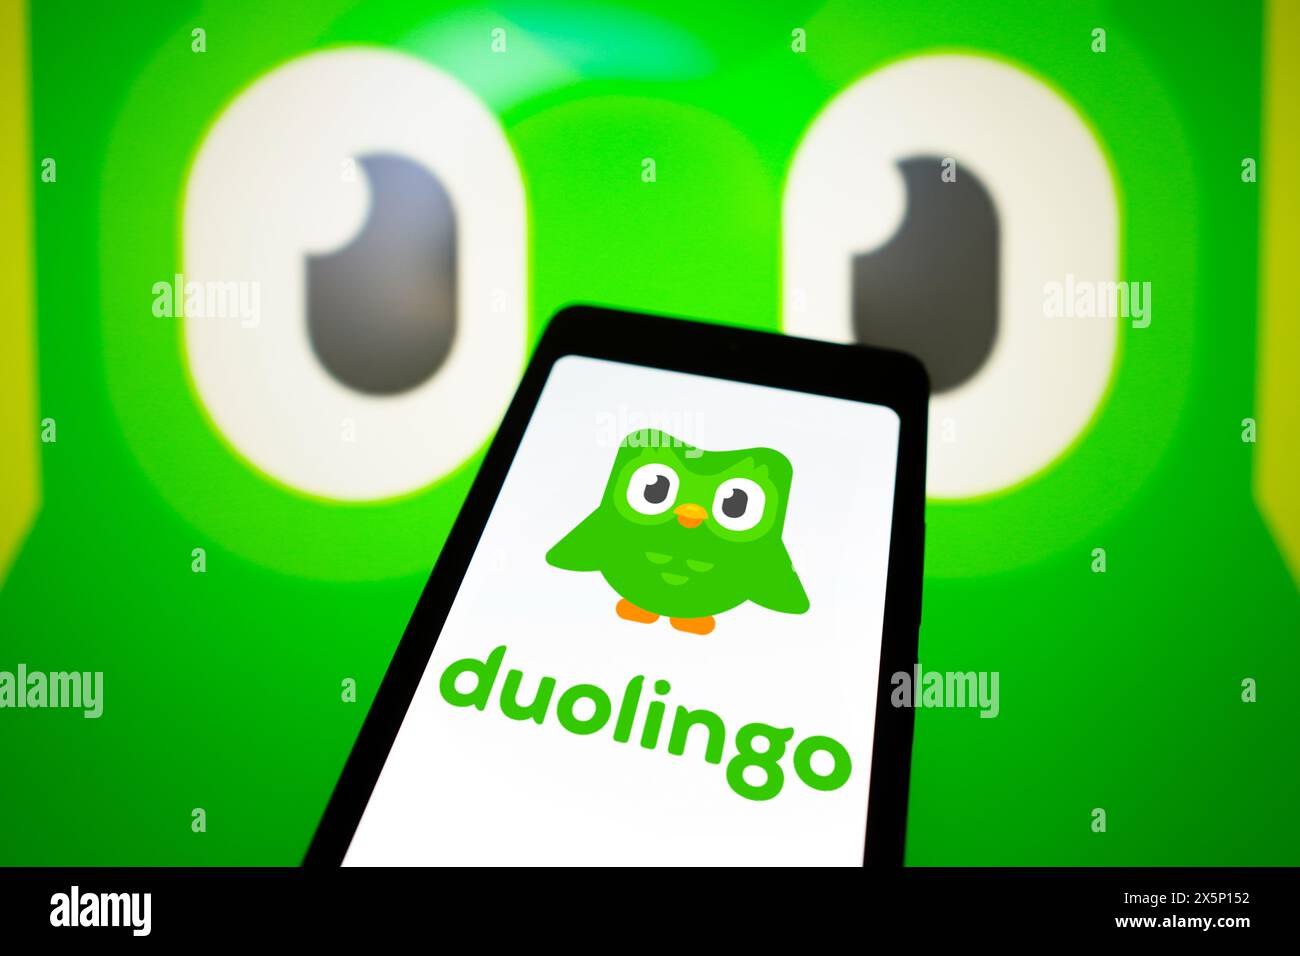 In this photo illustration, the Duolingo logo is displayed on a smartphone screen. Stock Photo